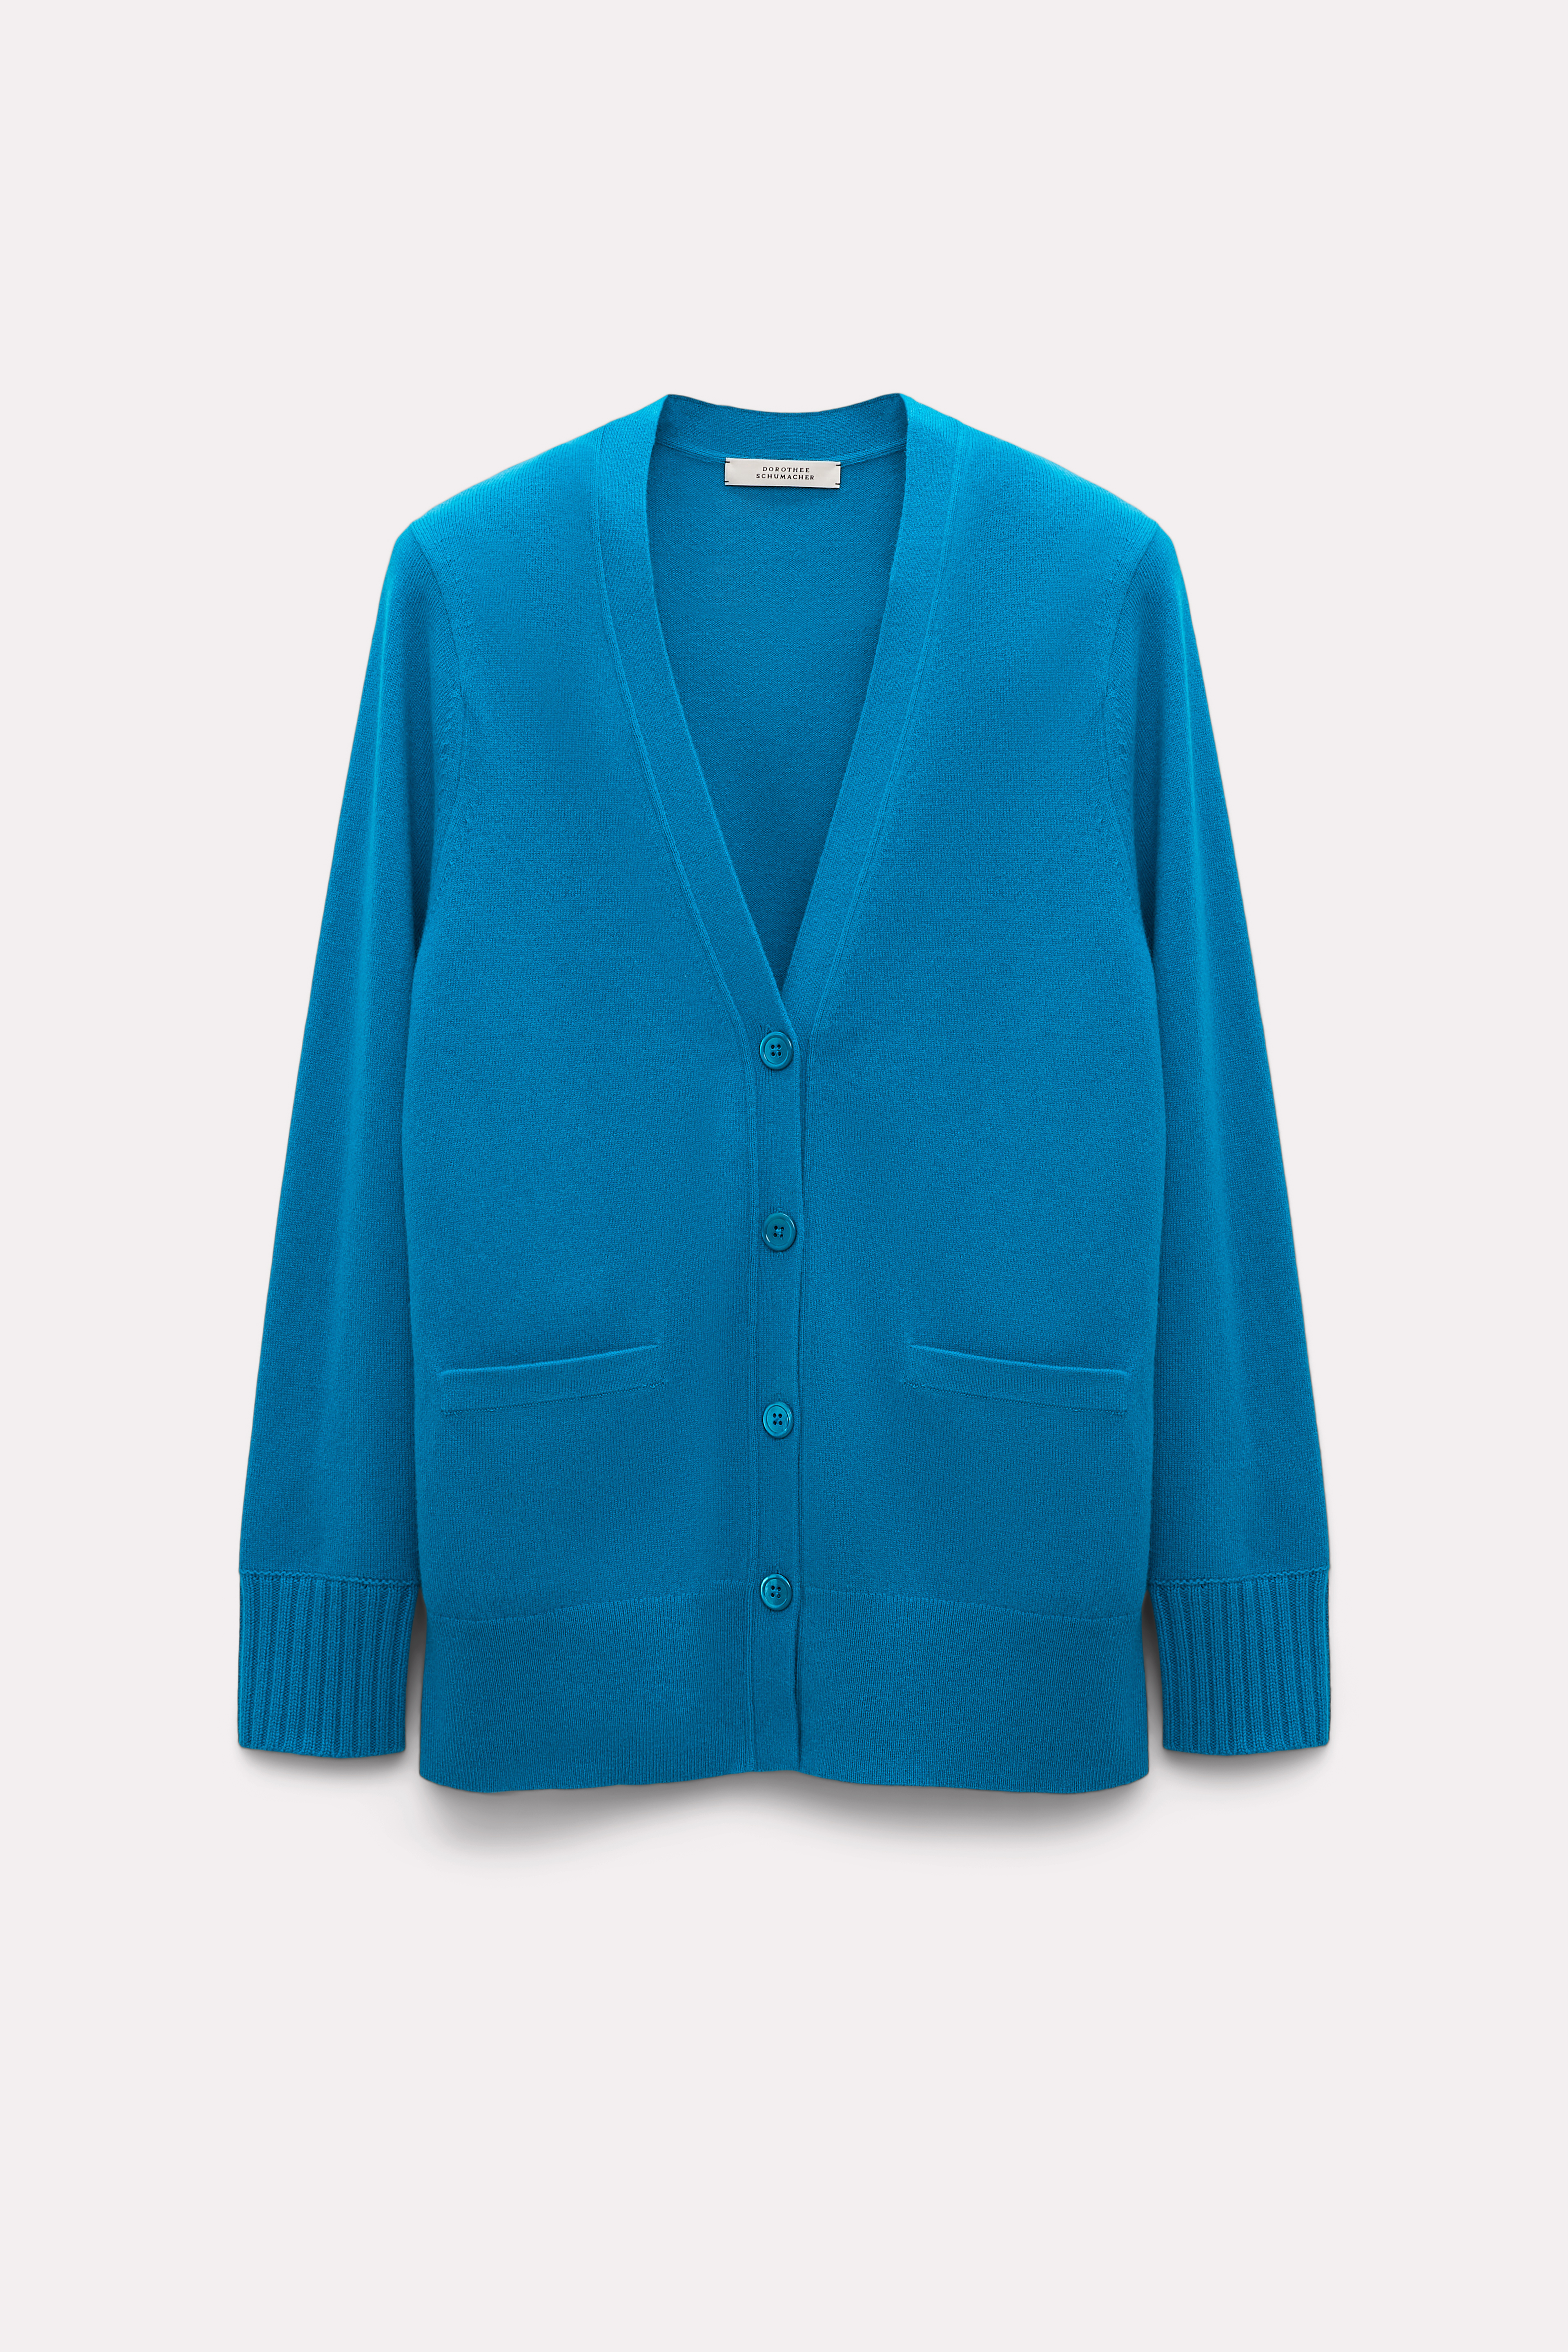 Dorothee Schumacher Cardigan With Pockets In Blue